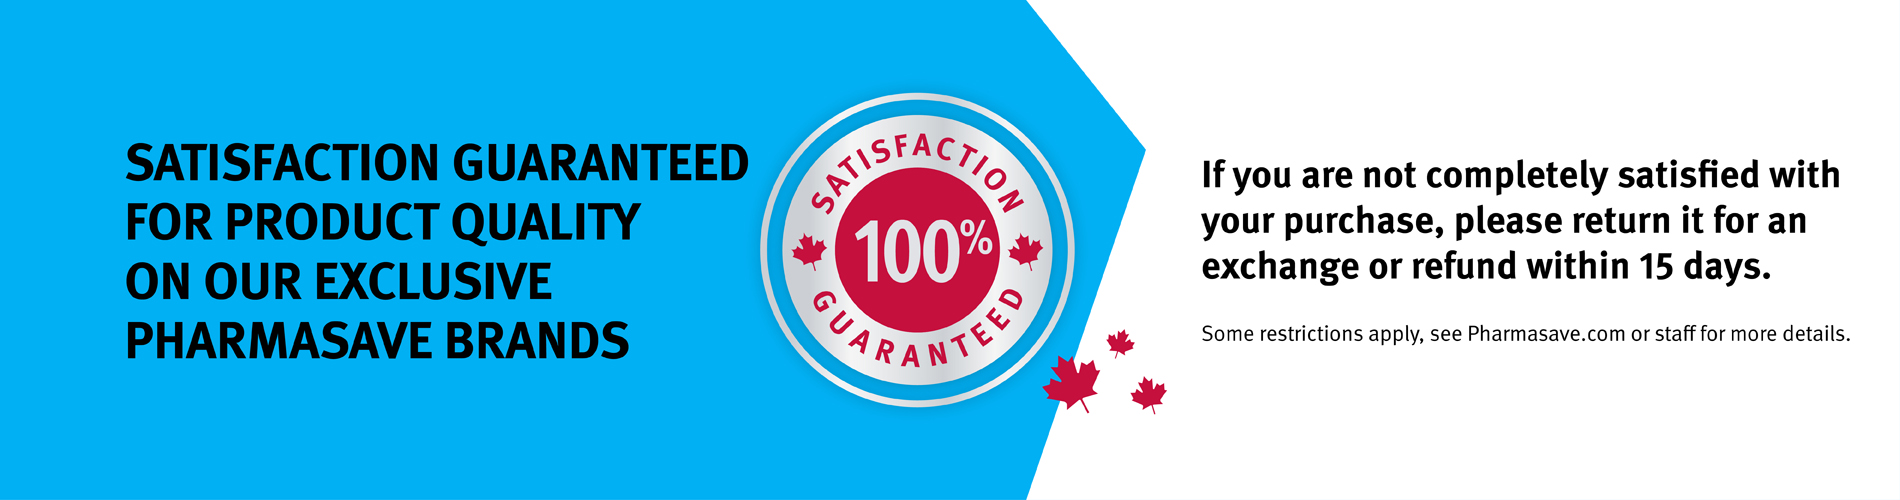 Satisfaction Guaranteed on Pharmasave Brand products.